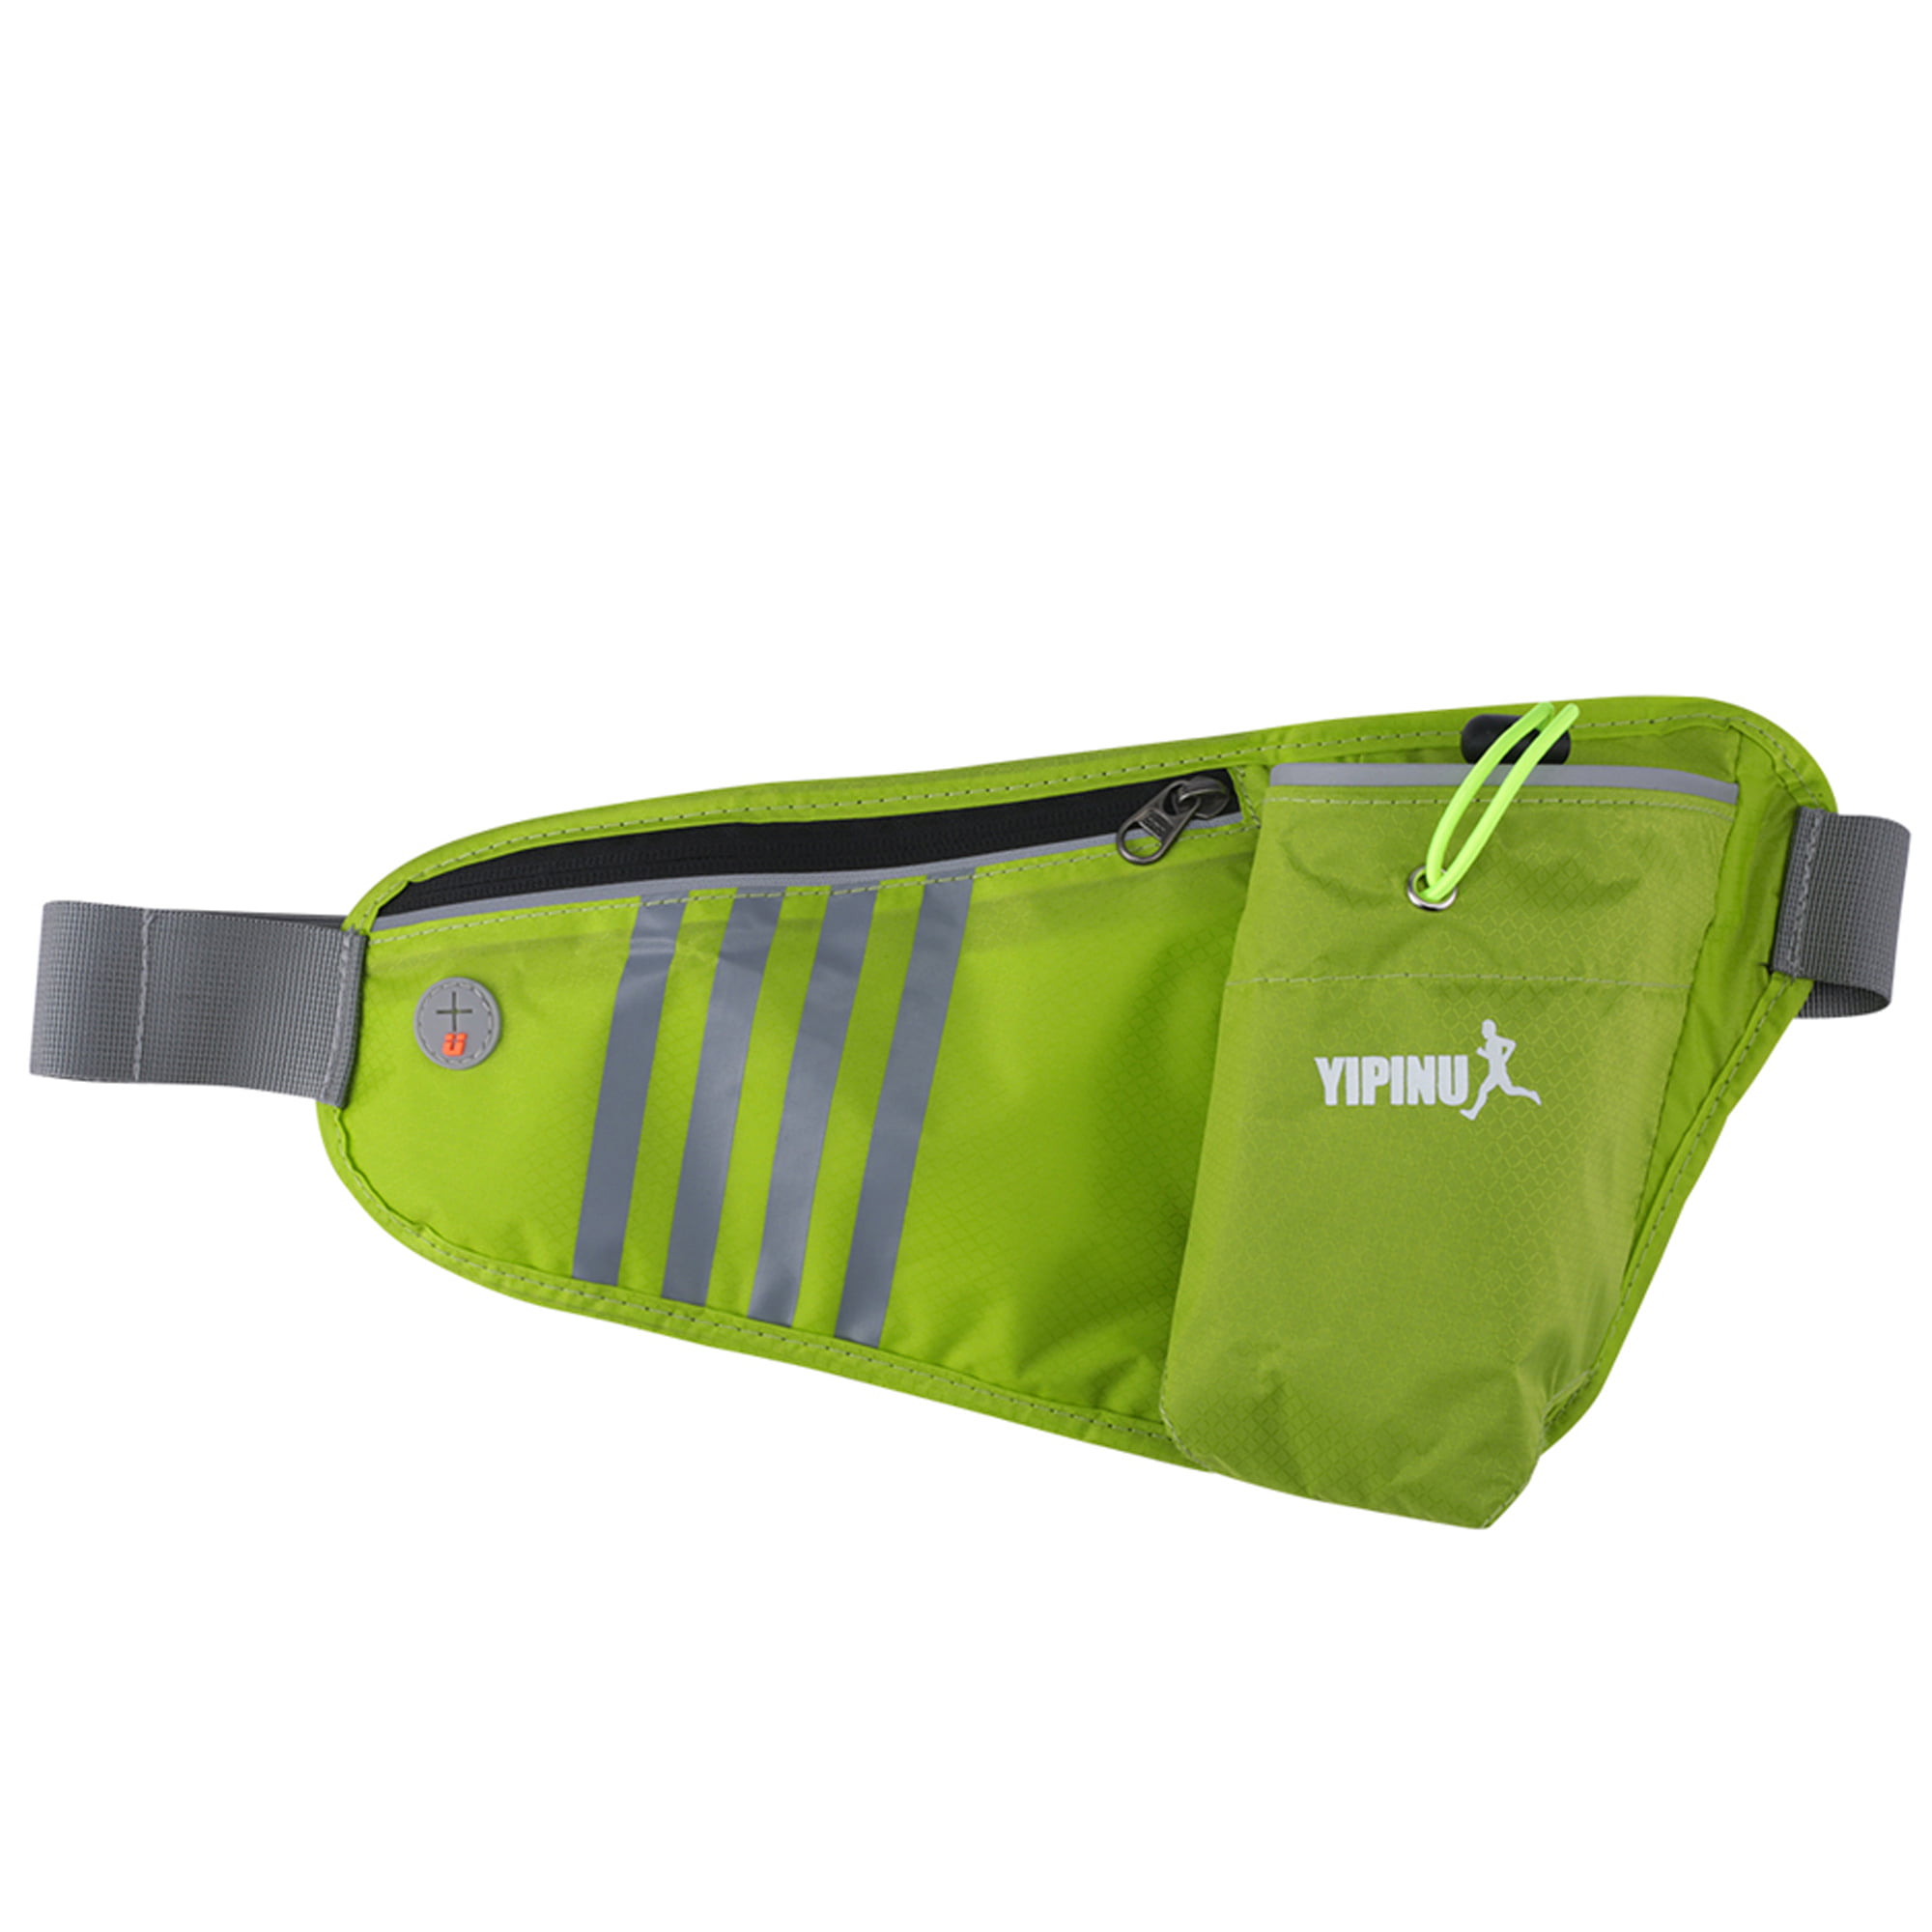 Exercise Hiking FitZip Waist Fanny Pack Festival store water bottles 4 Colors 